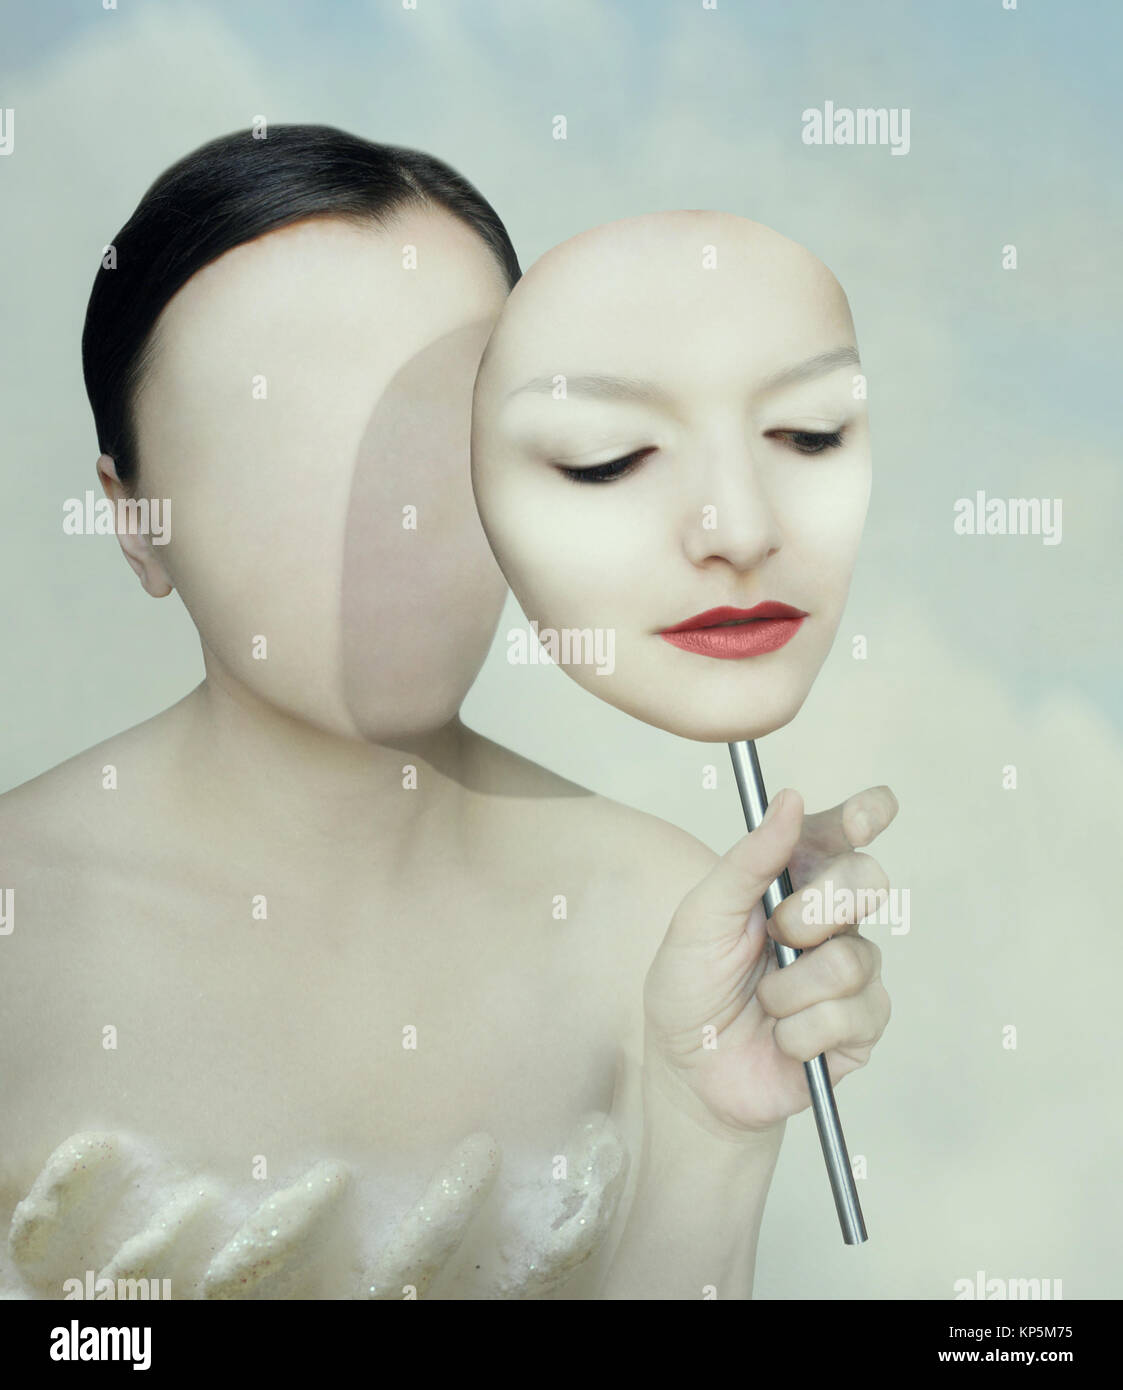 Surreal portrait of a woman faceless with her face mask Stock Photo